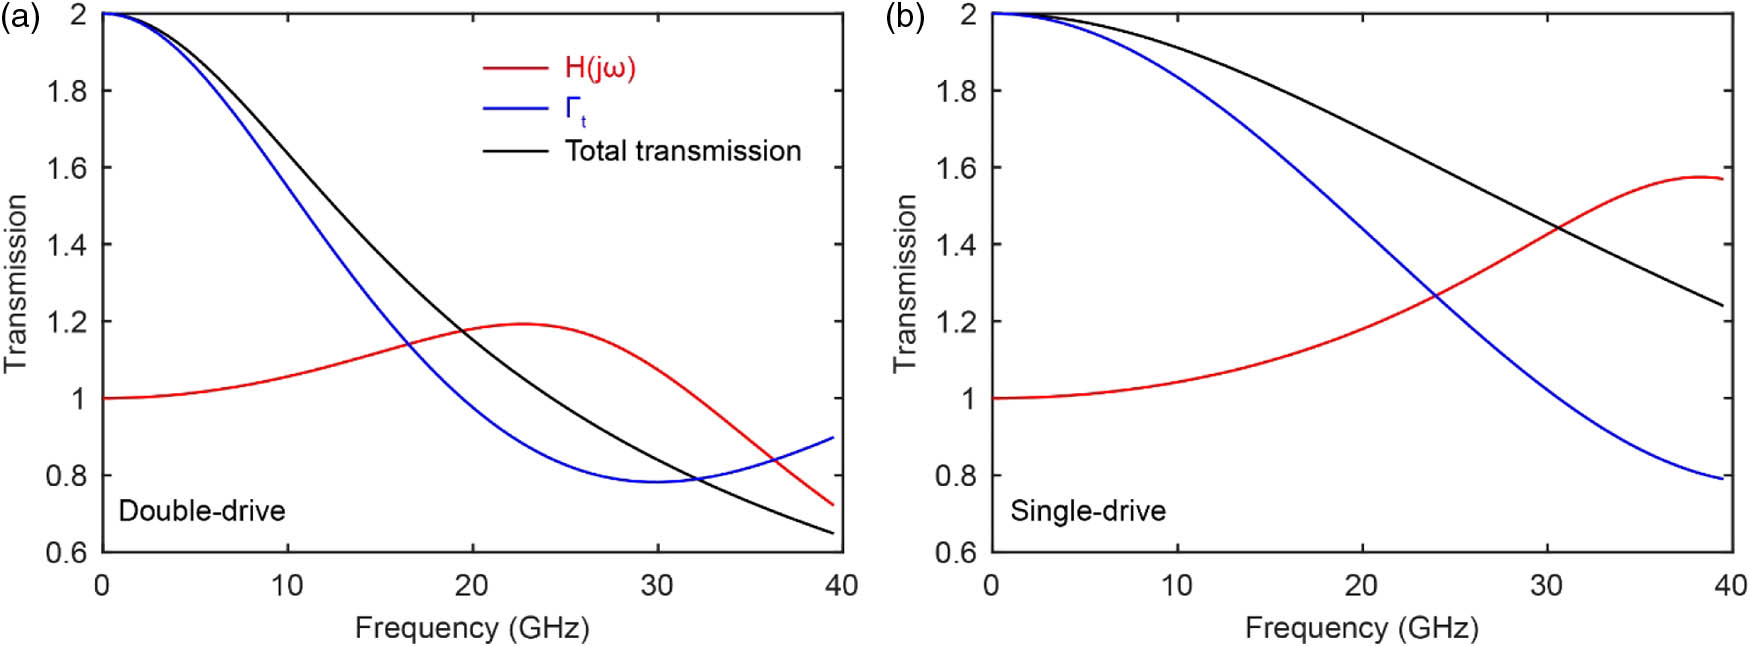 Frequency response of lumped modulators of (a) double-drive and (b) single-drive. Red, blue, and black lines represent the modulus of system transfer function H(jω), voltage transmission due to RF reflection Γt, and their product. Calculation uses VπLπ=1 V·cm.